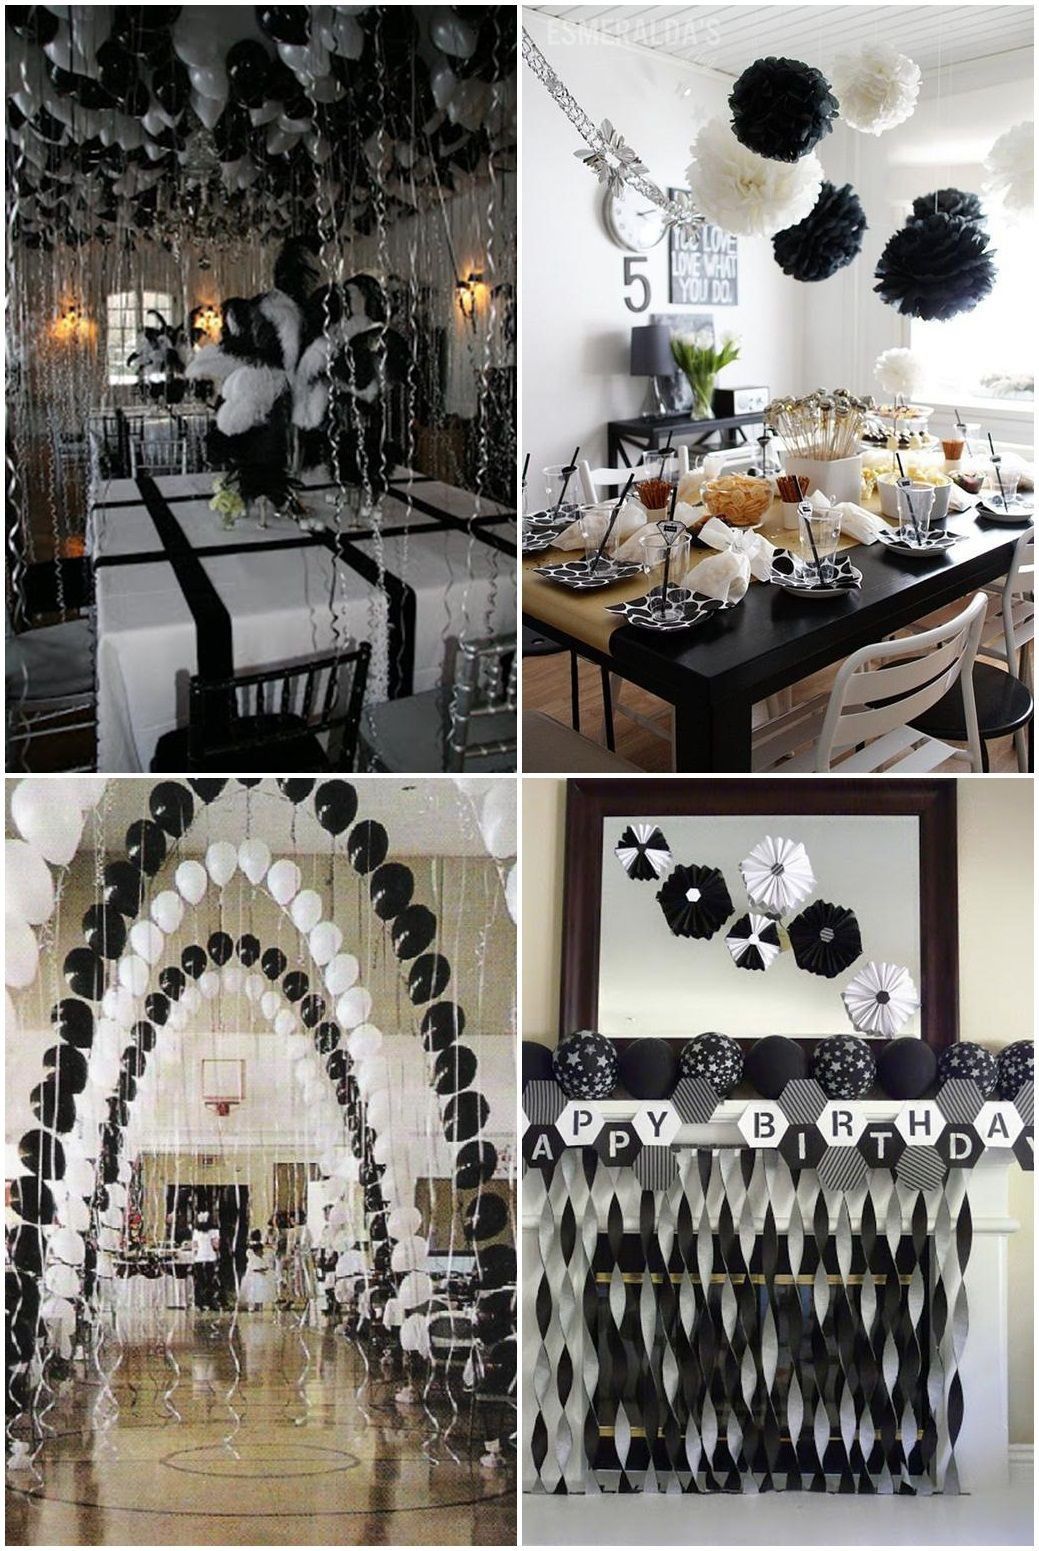 Graduation Party Decoration Ideas For Guys
 Black And White Graduation Party Ideas